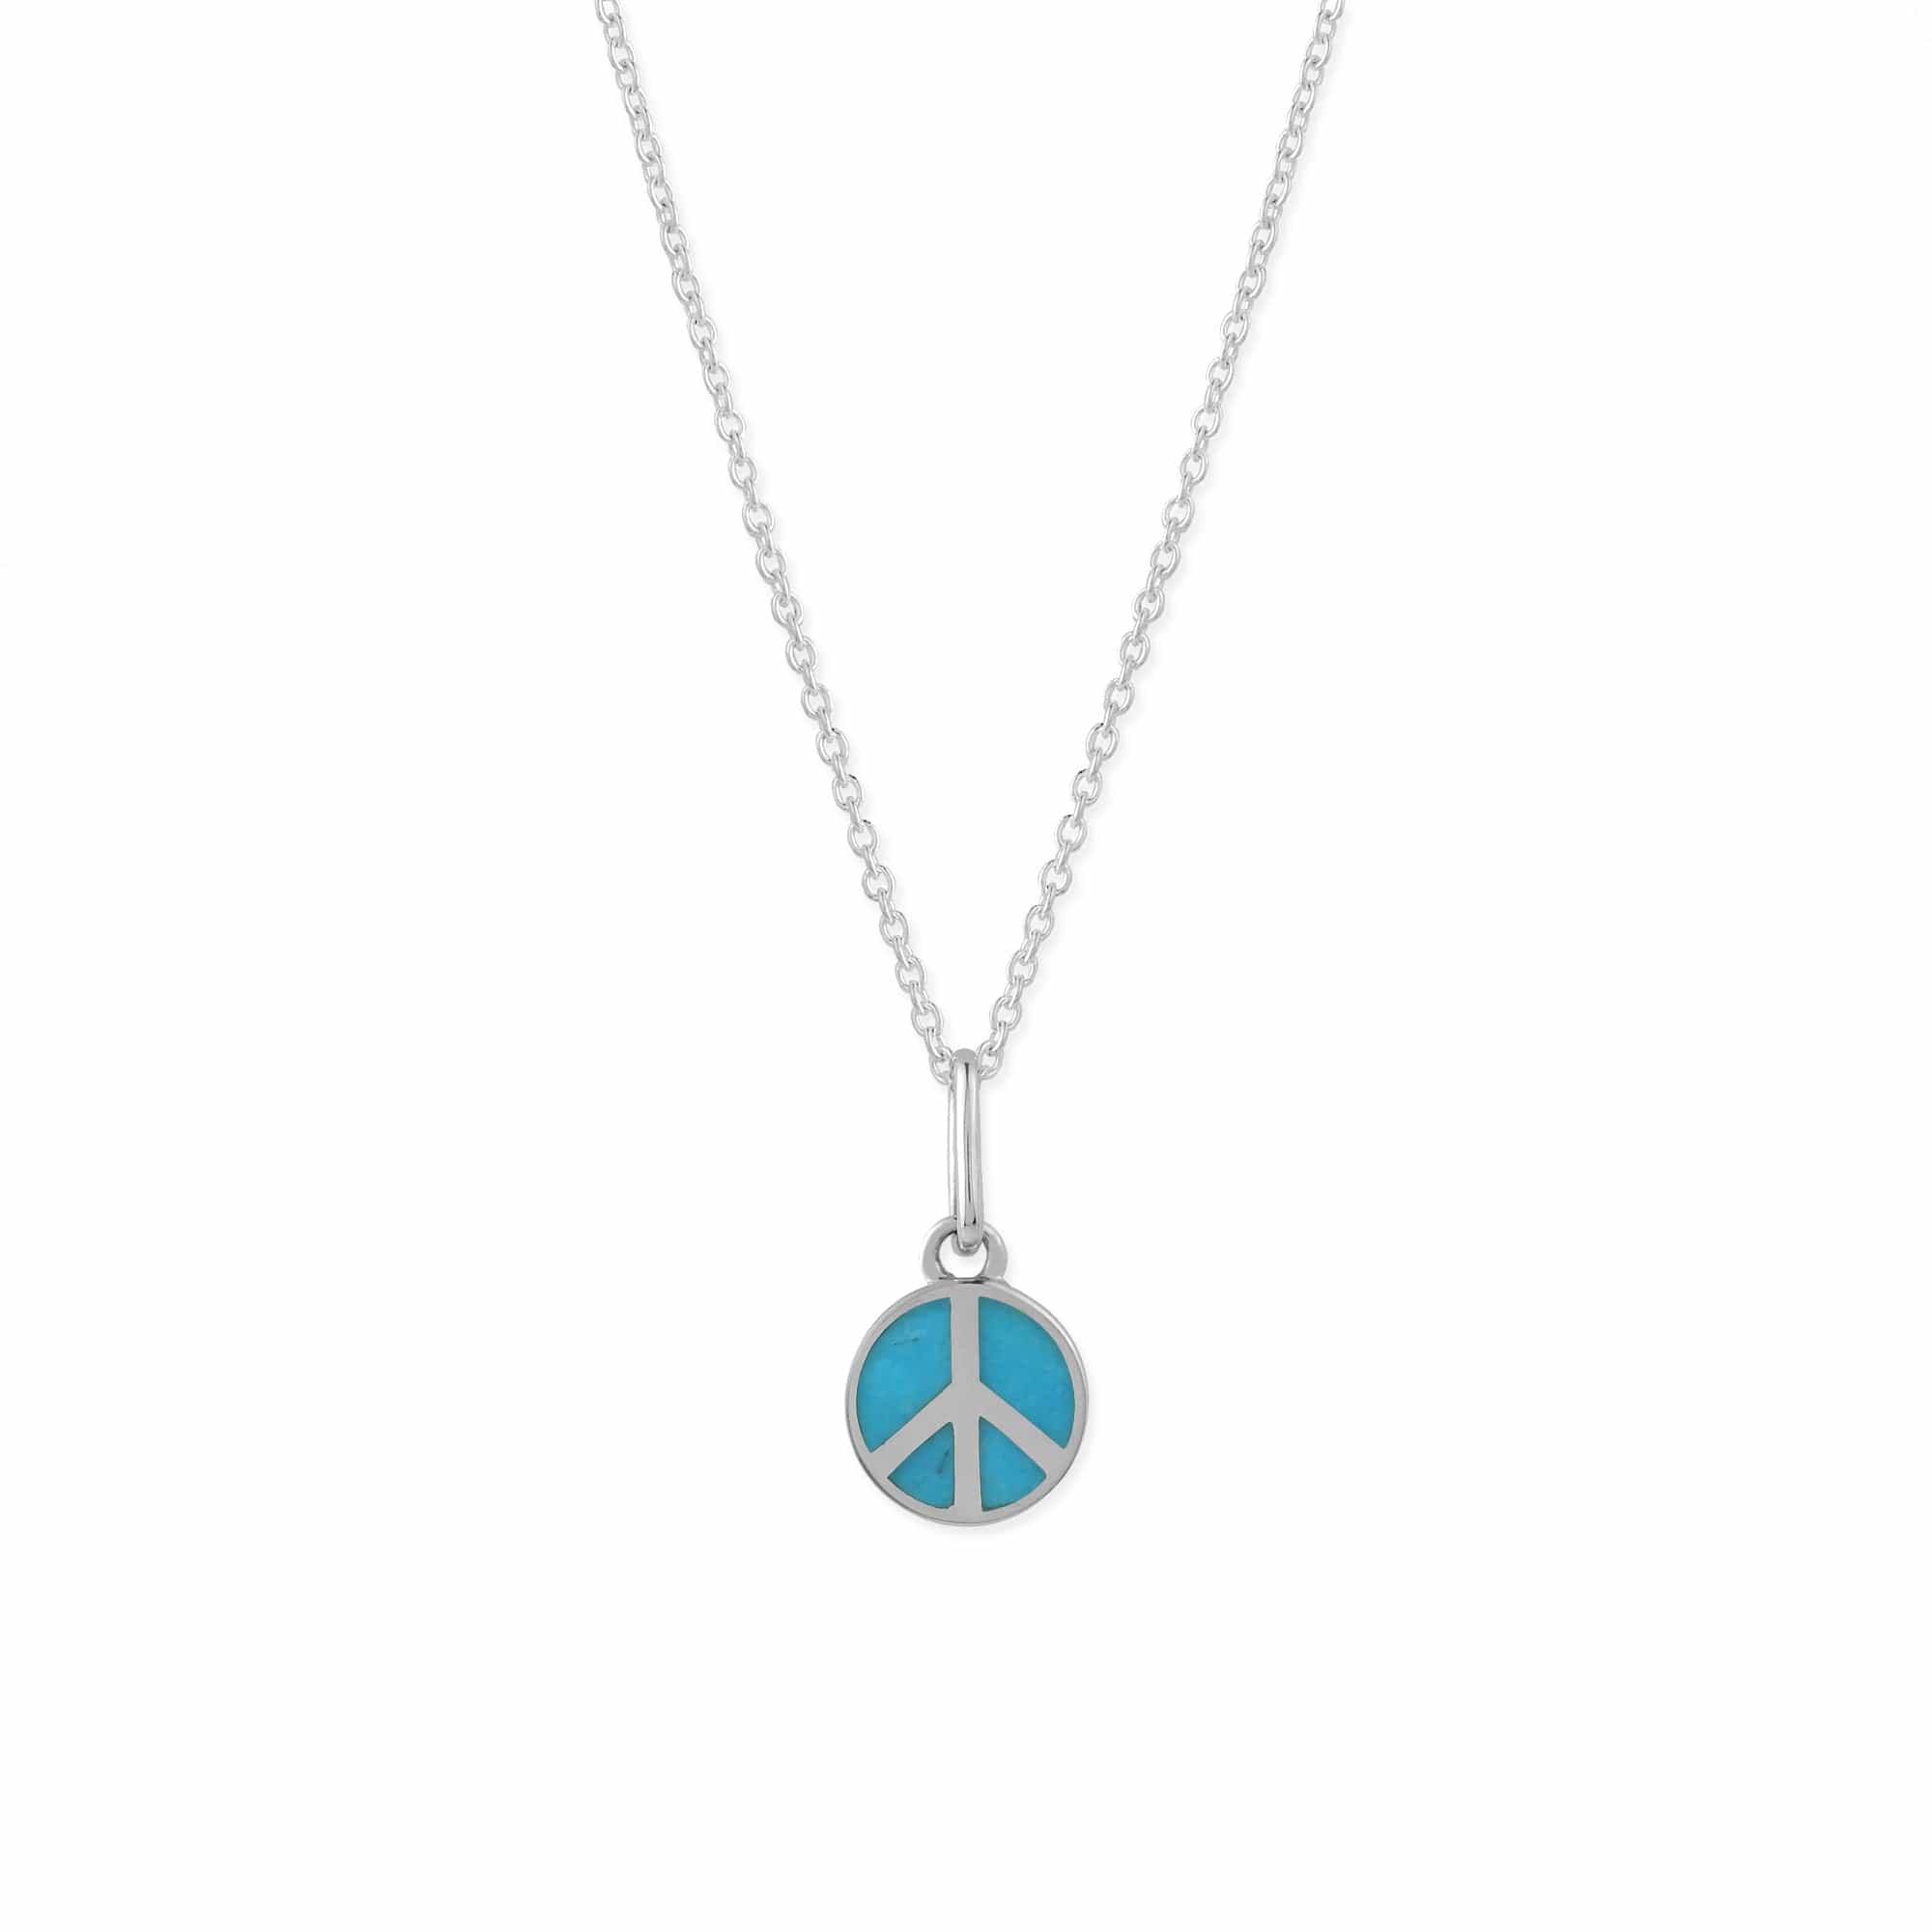 Boma Jewelry Necklaces Necklace and Charm Peace Always Charm Necklace